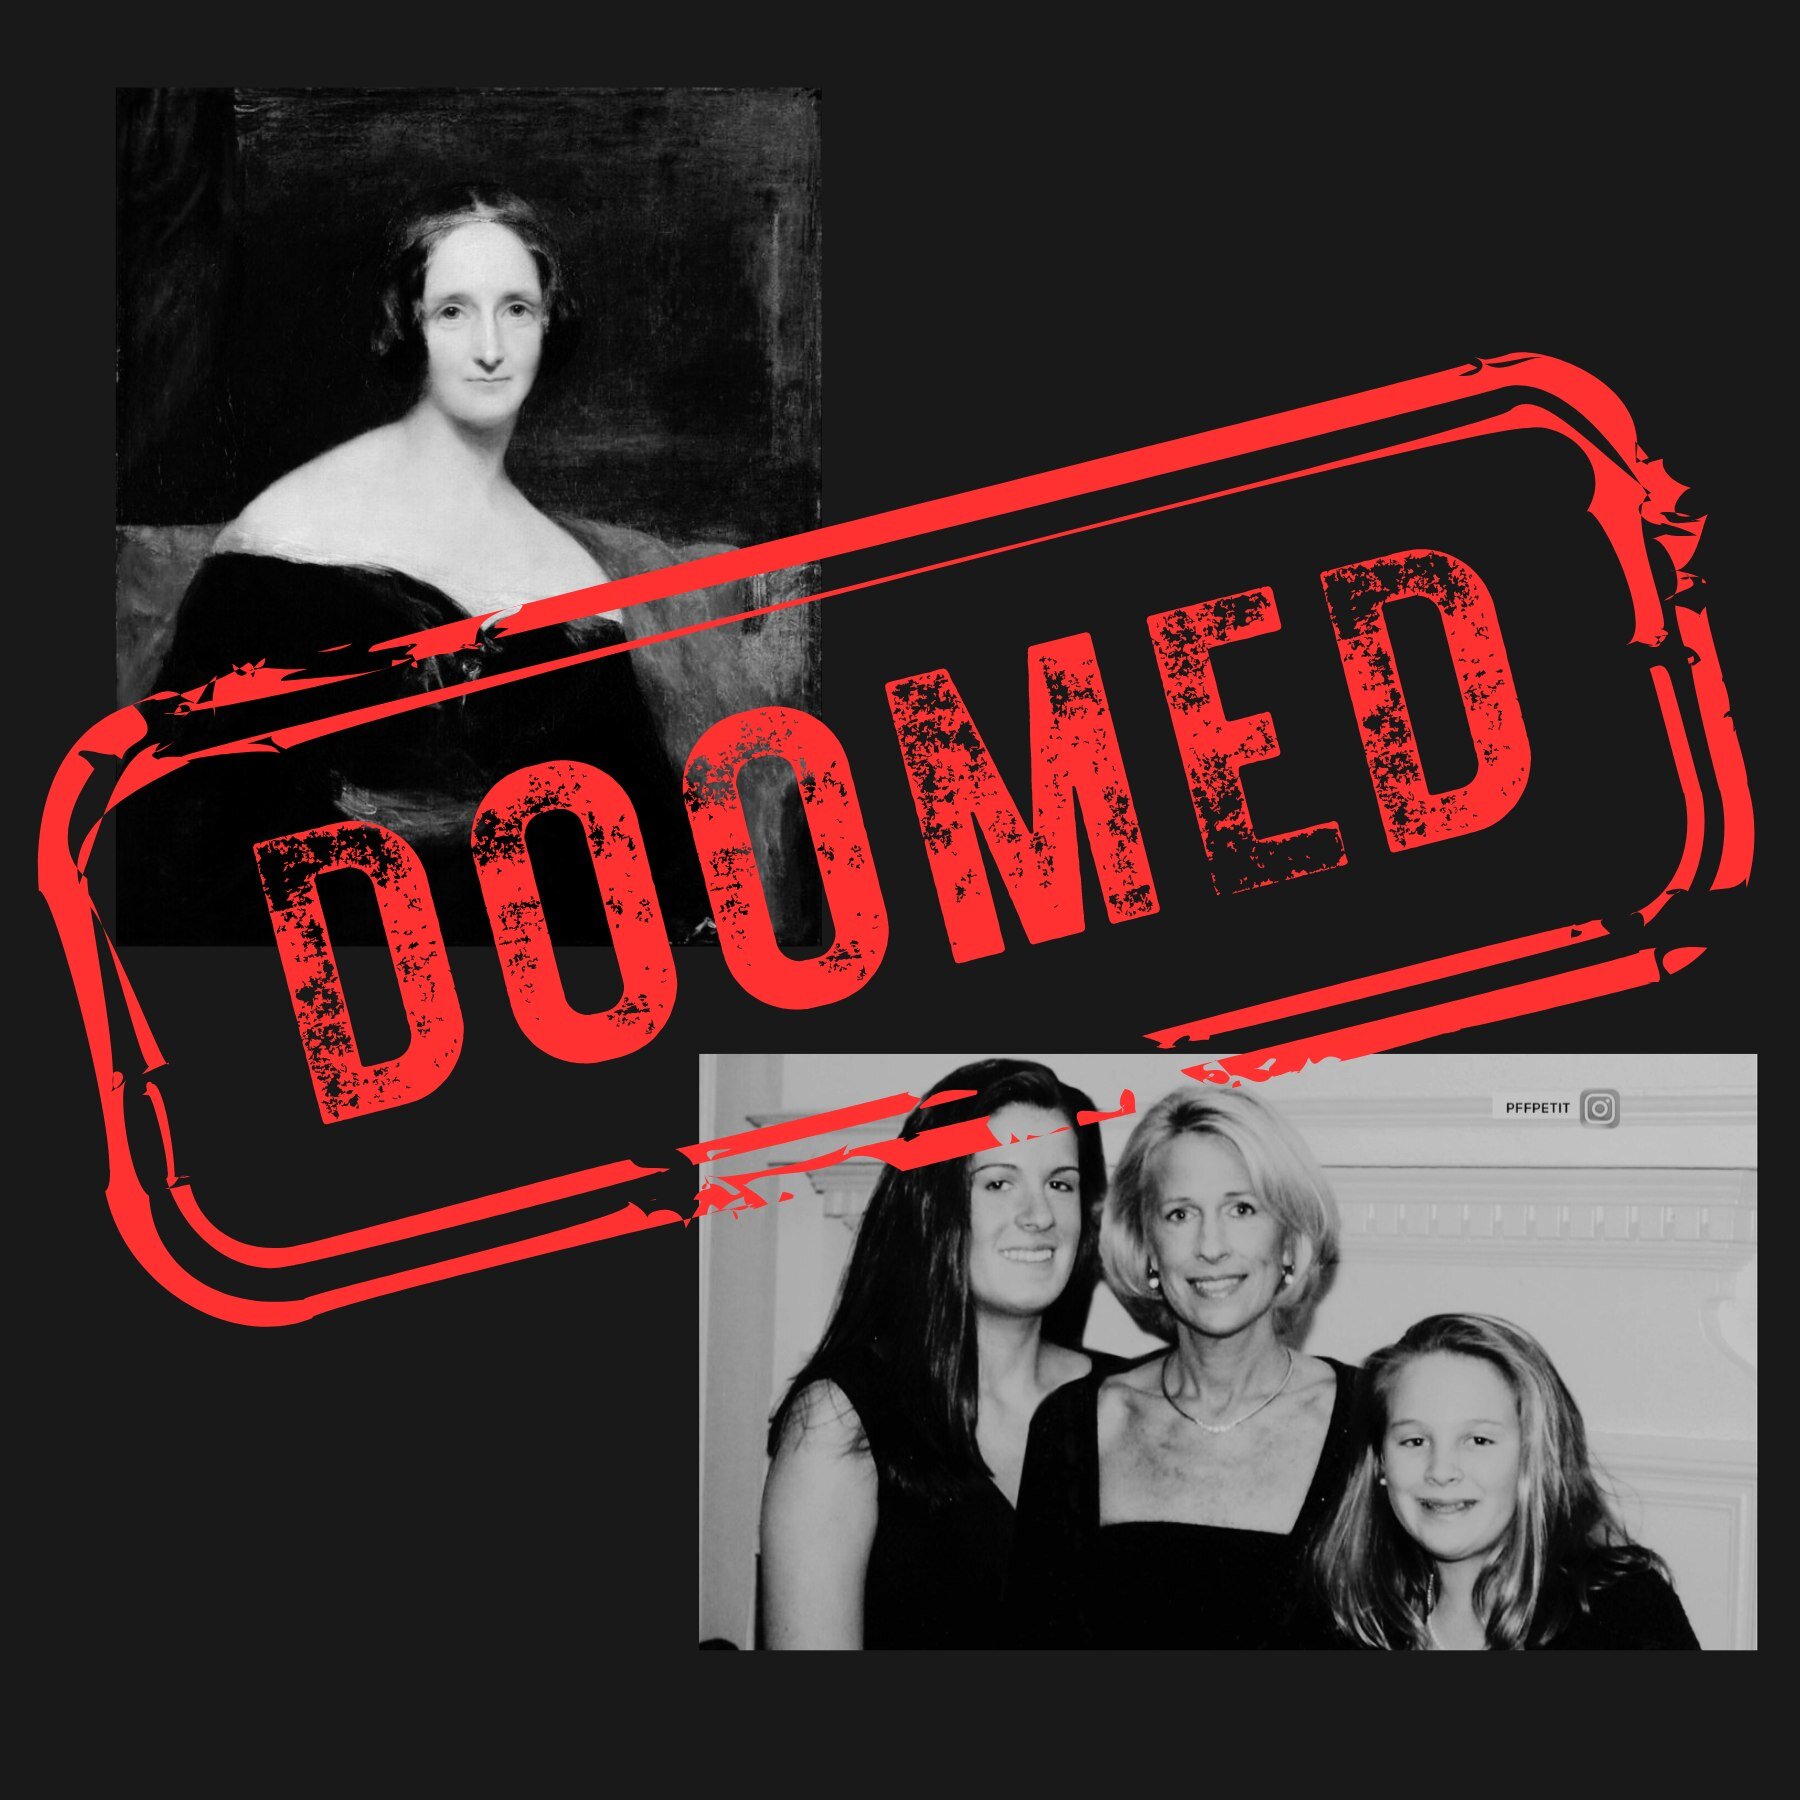 On this week's episode we cover the #doomed relationships of #MaryShelley &amp; #percyshelley - and the doomed friendship that led to the #cheshiremurders. #Theshelleys are a tragic gothic love story - The Petit Family's story is just tragic. 

#link